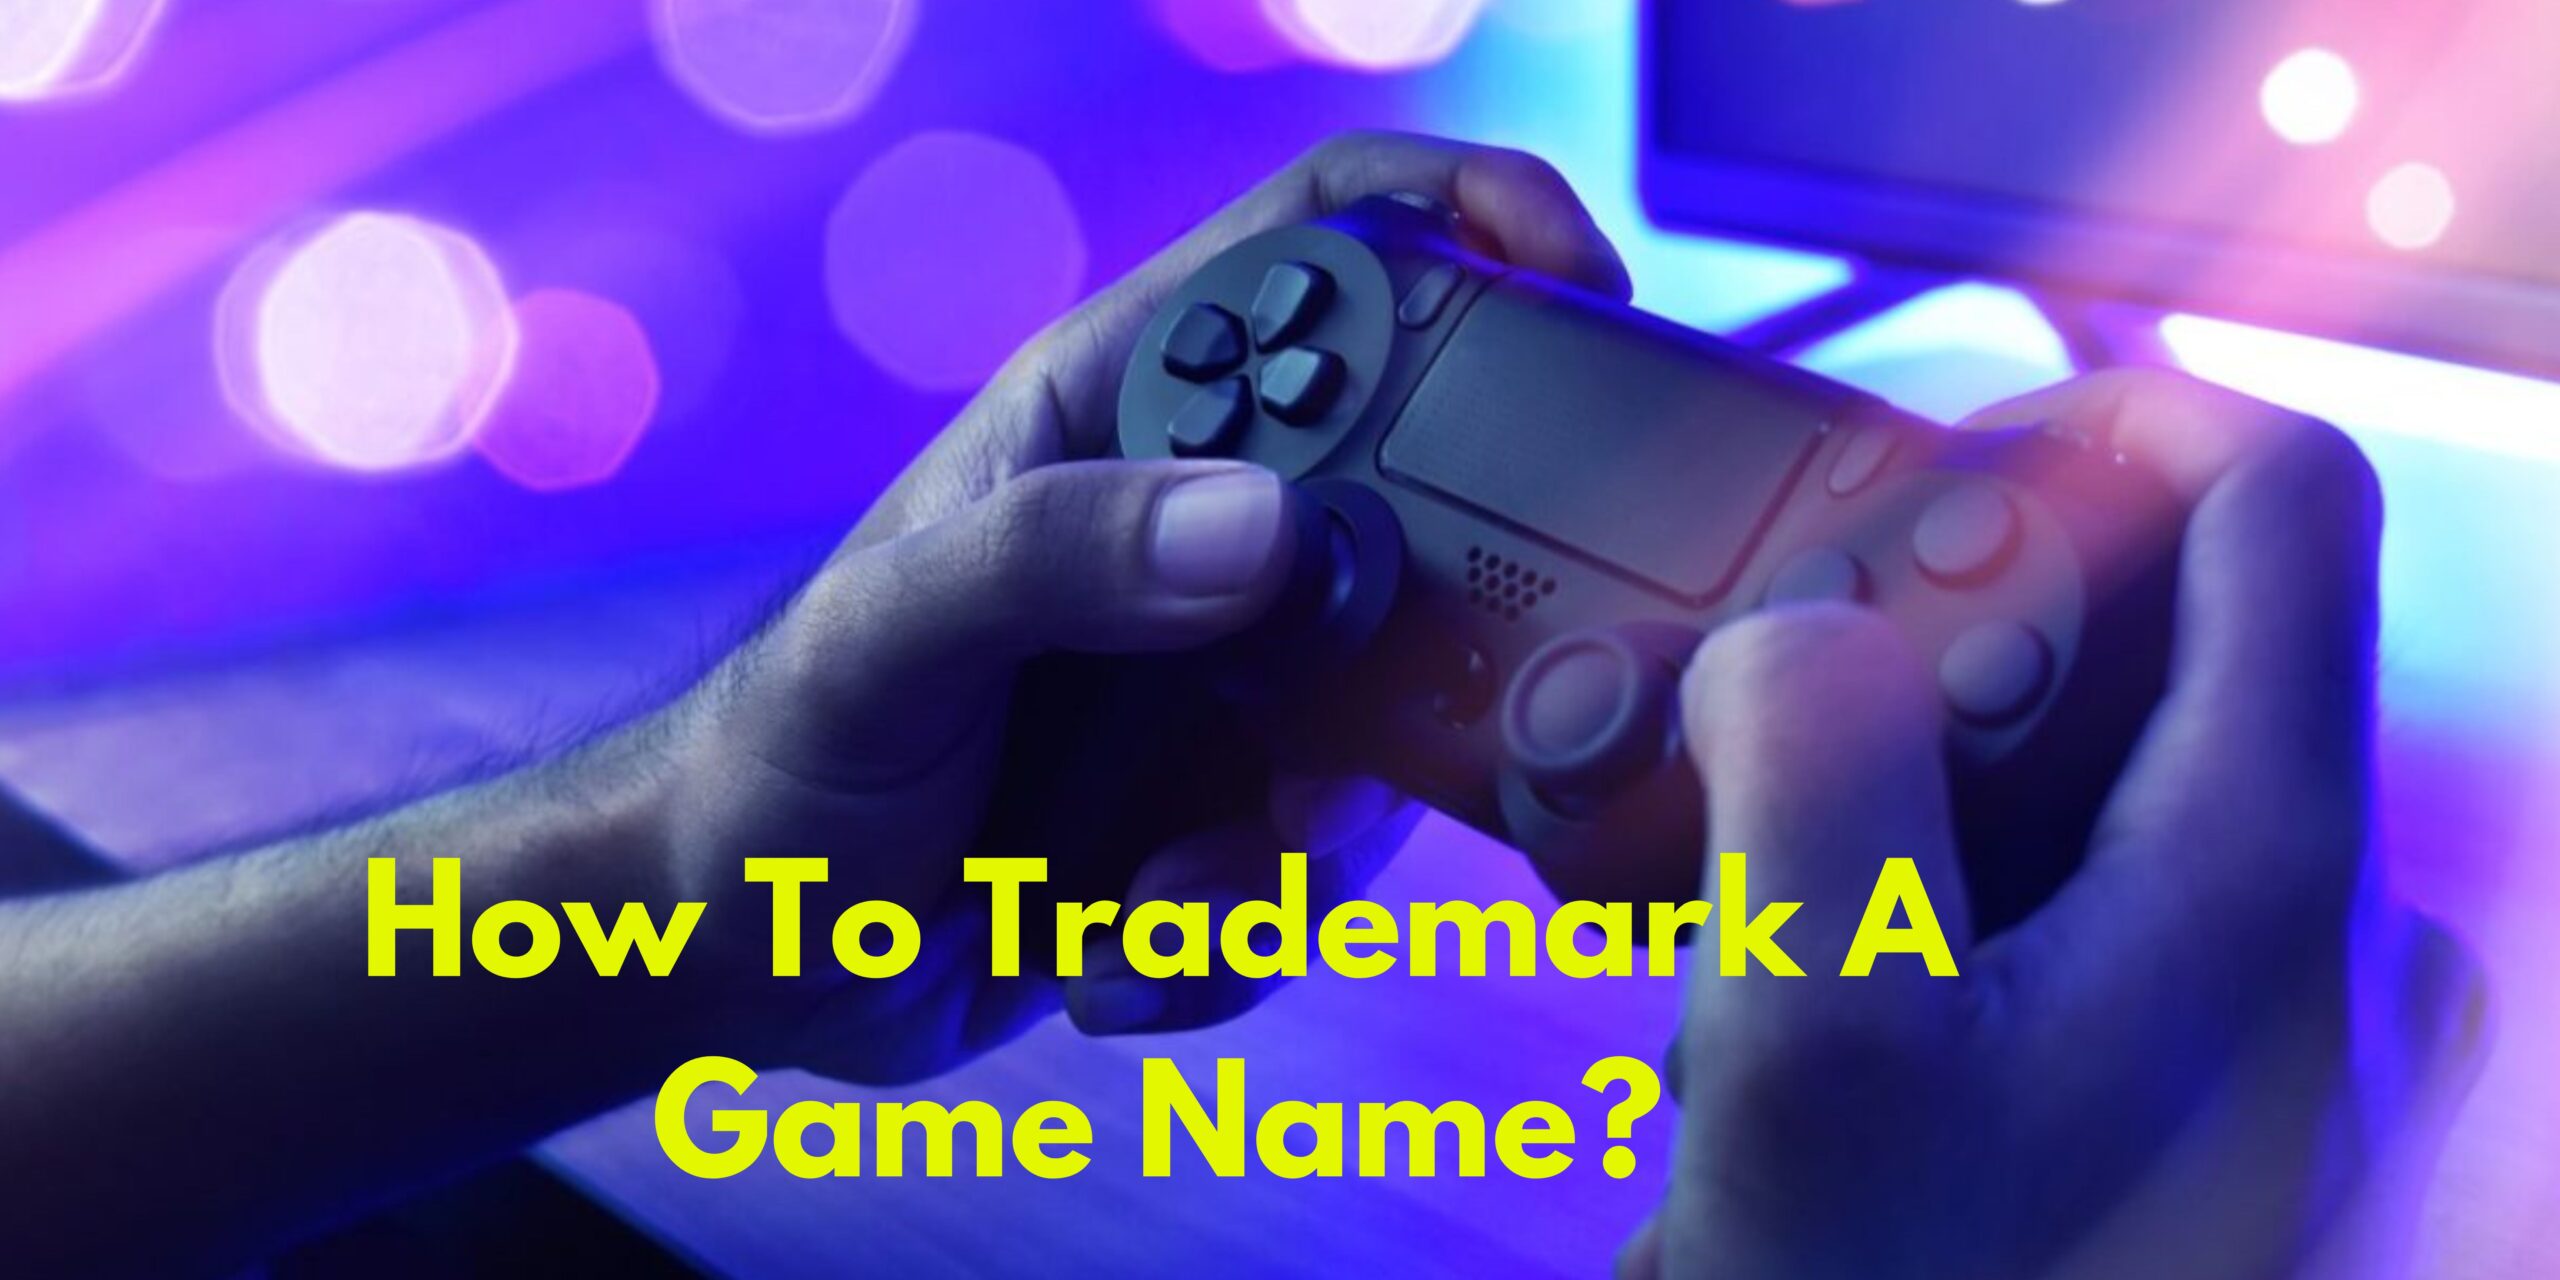 How To Trademark A Game Name?